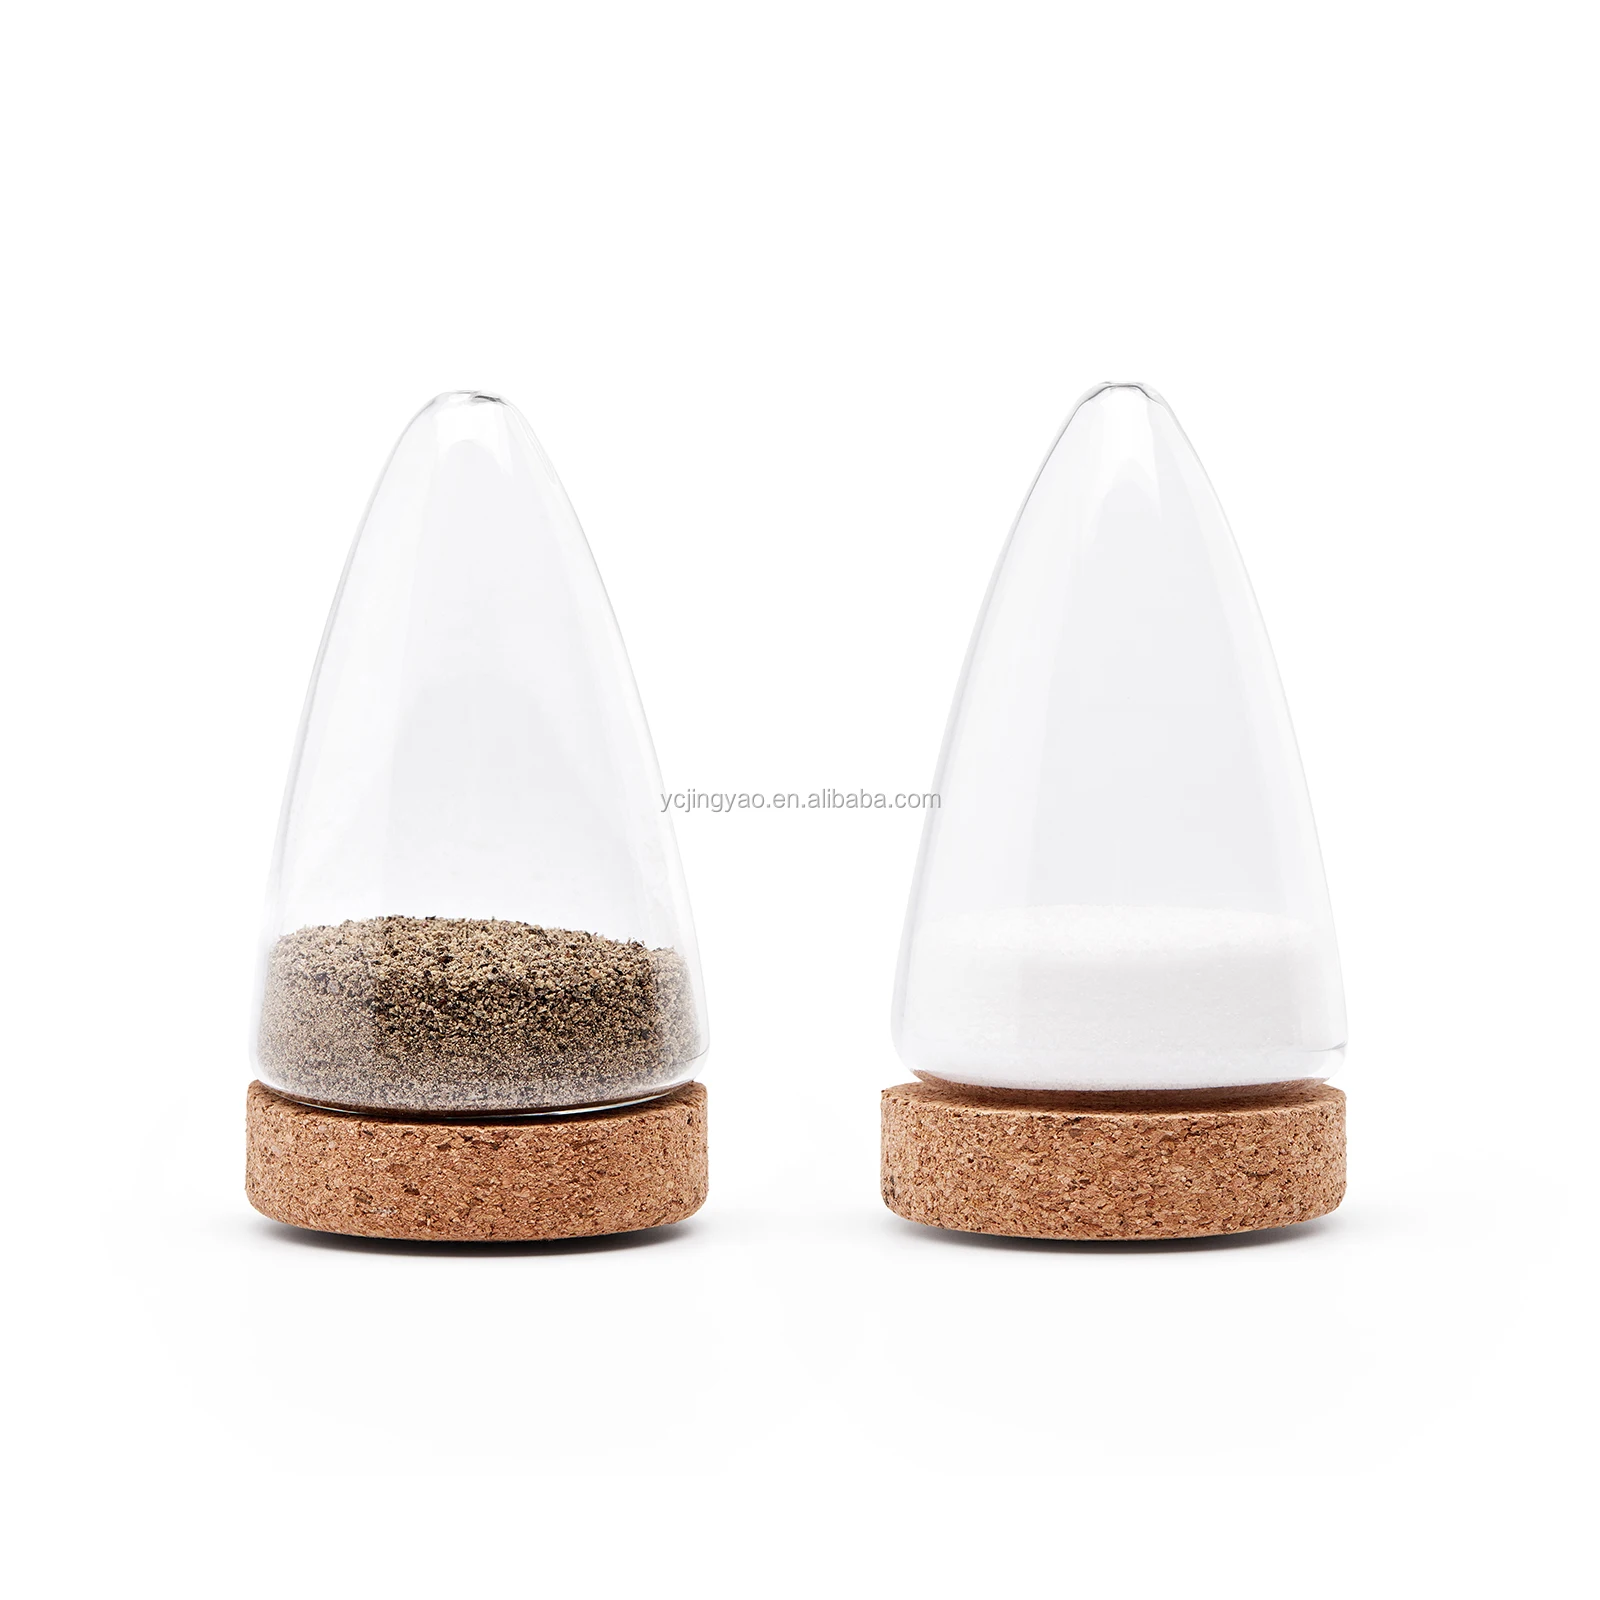 

Kitchen Small Clear Glass Spice Jar Salt and Pepper Set Bottle with Cork Stopper, Transparent